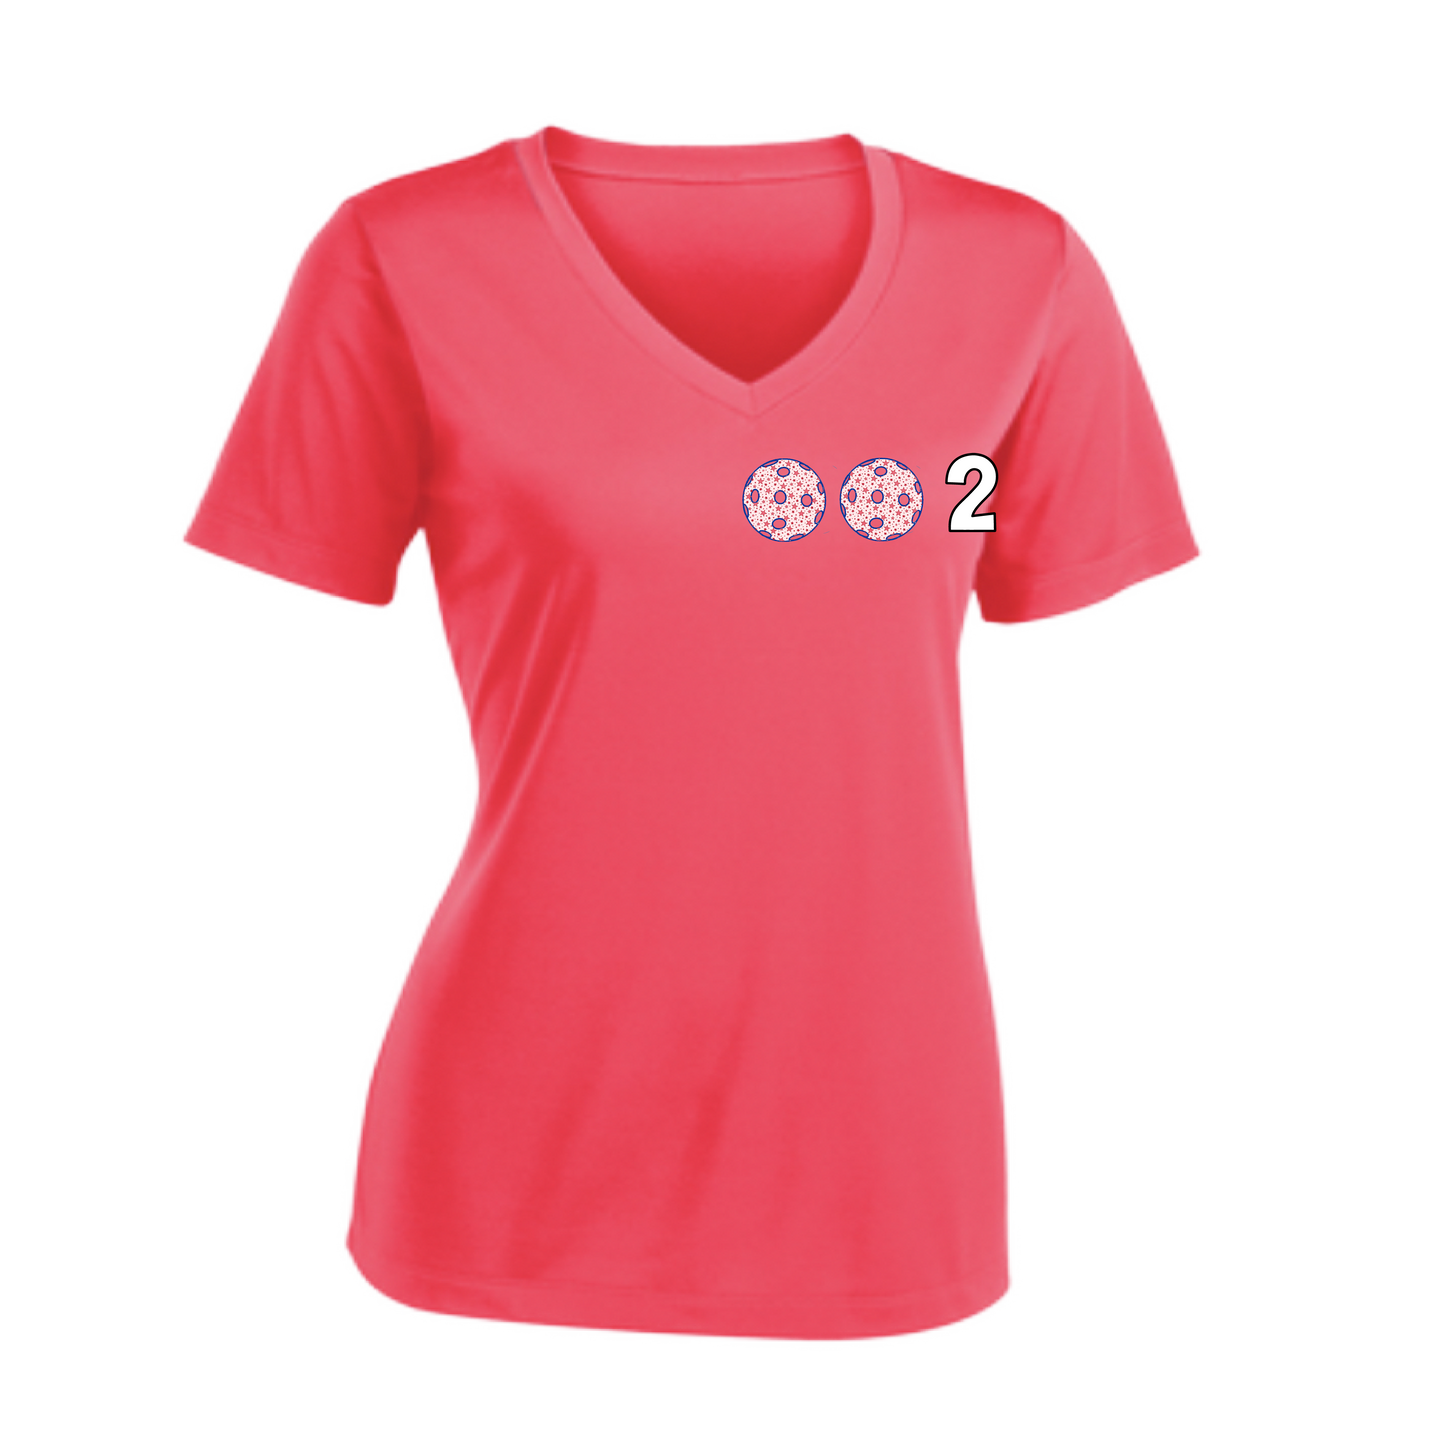 002 With Pickleballs (Colors Yellow Pink White) Customizable | Women's Short Sleeve V-Neck Pickleball Shirts | 100% Polyester